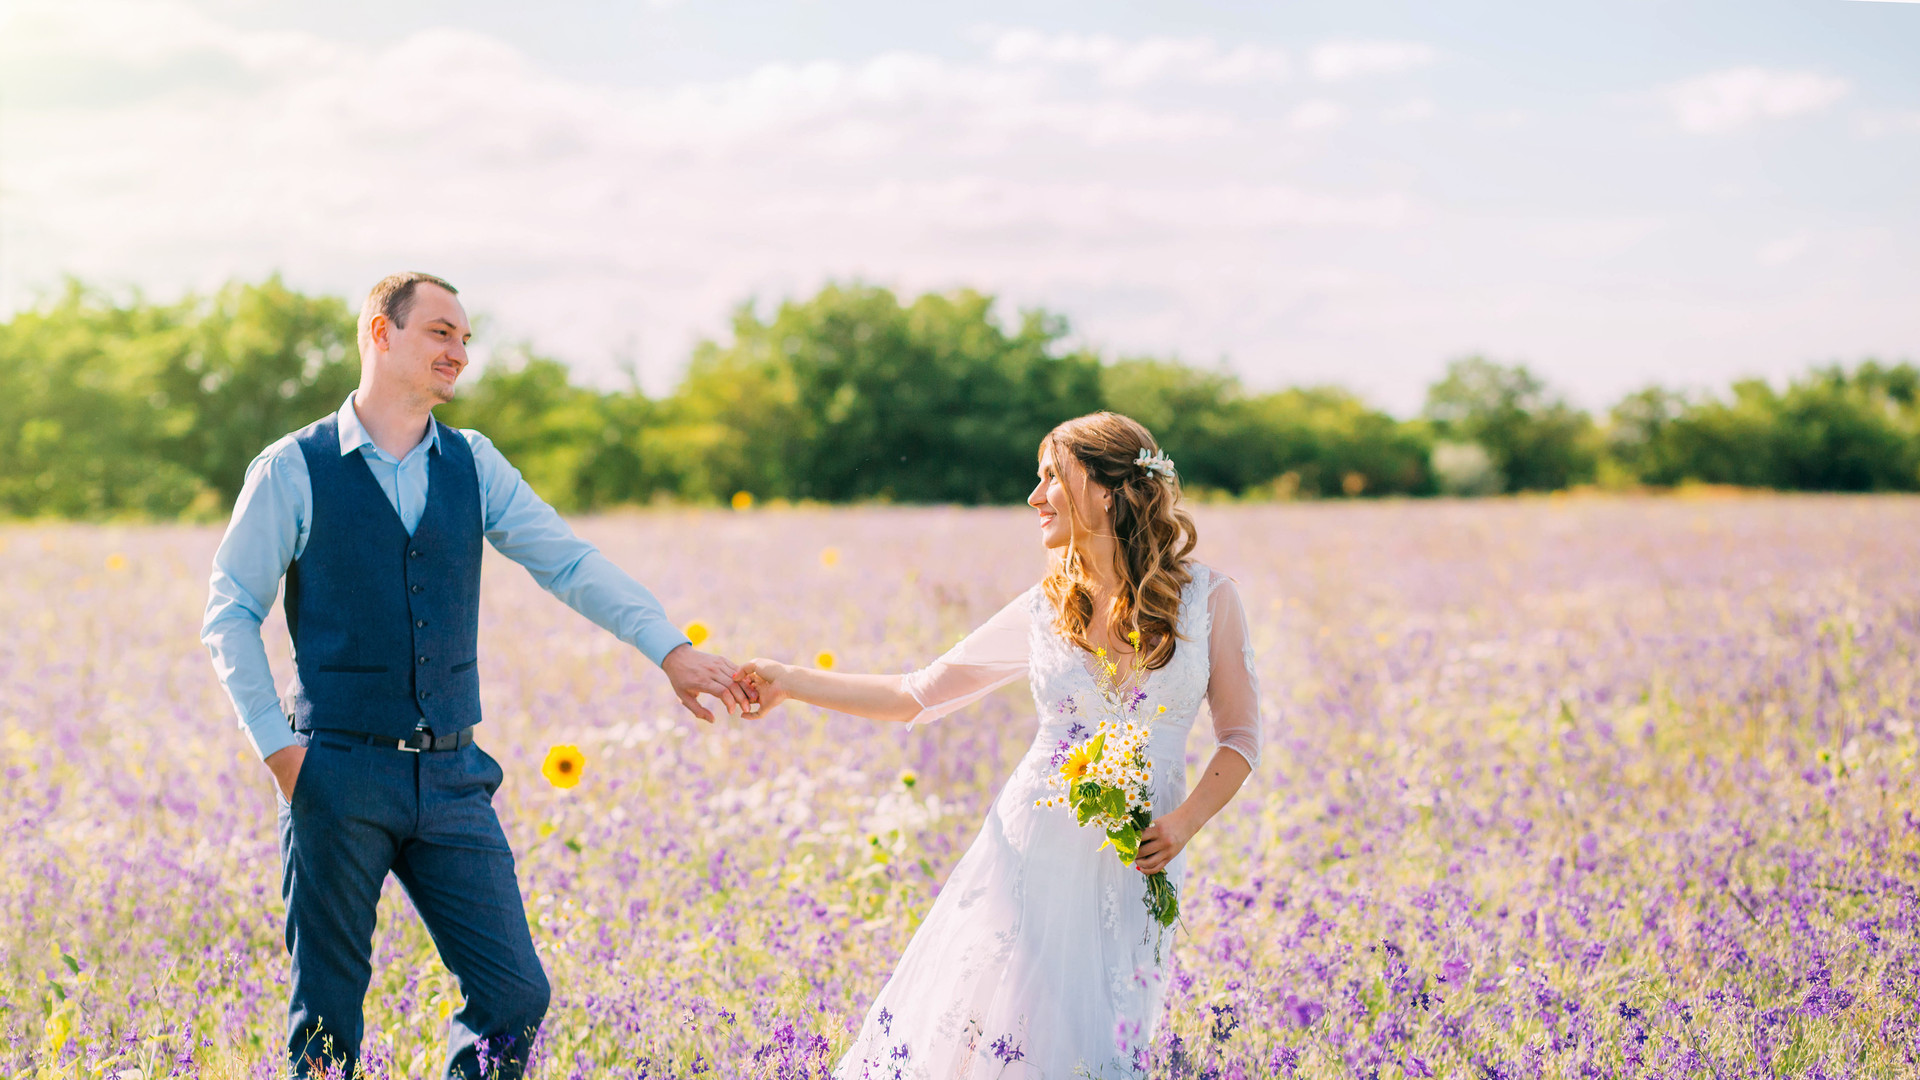 married couple walking in the field of purple flowers, the bride leads the groom behind her, the girl holds the guy by the hand, smiles, smoking hair, a woman in a white wedding dress, blue suit